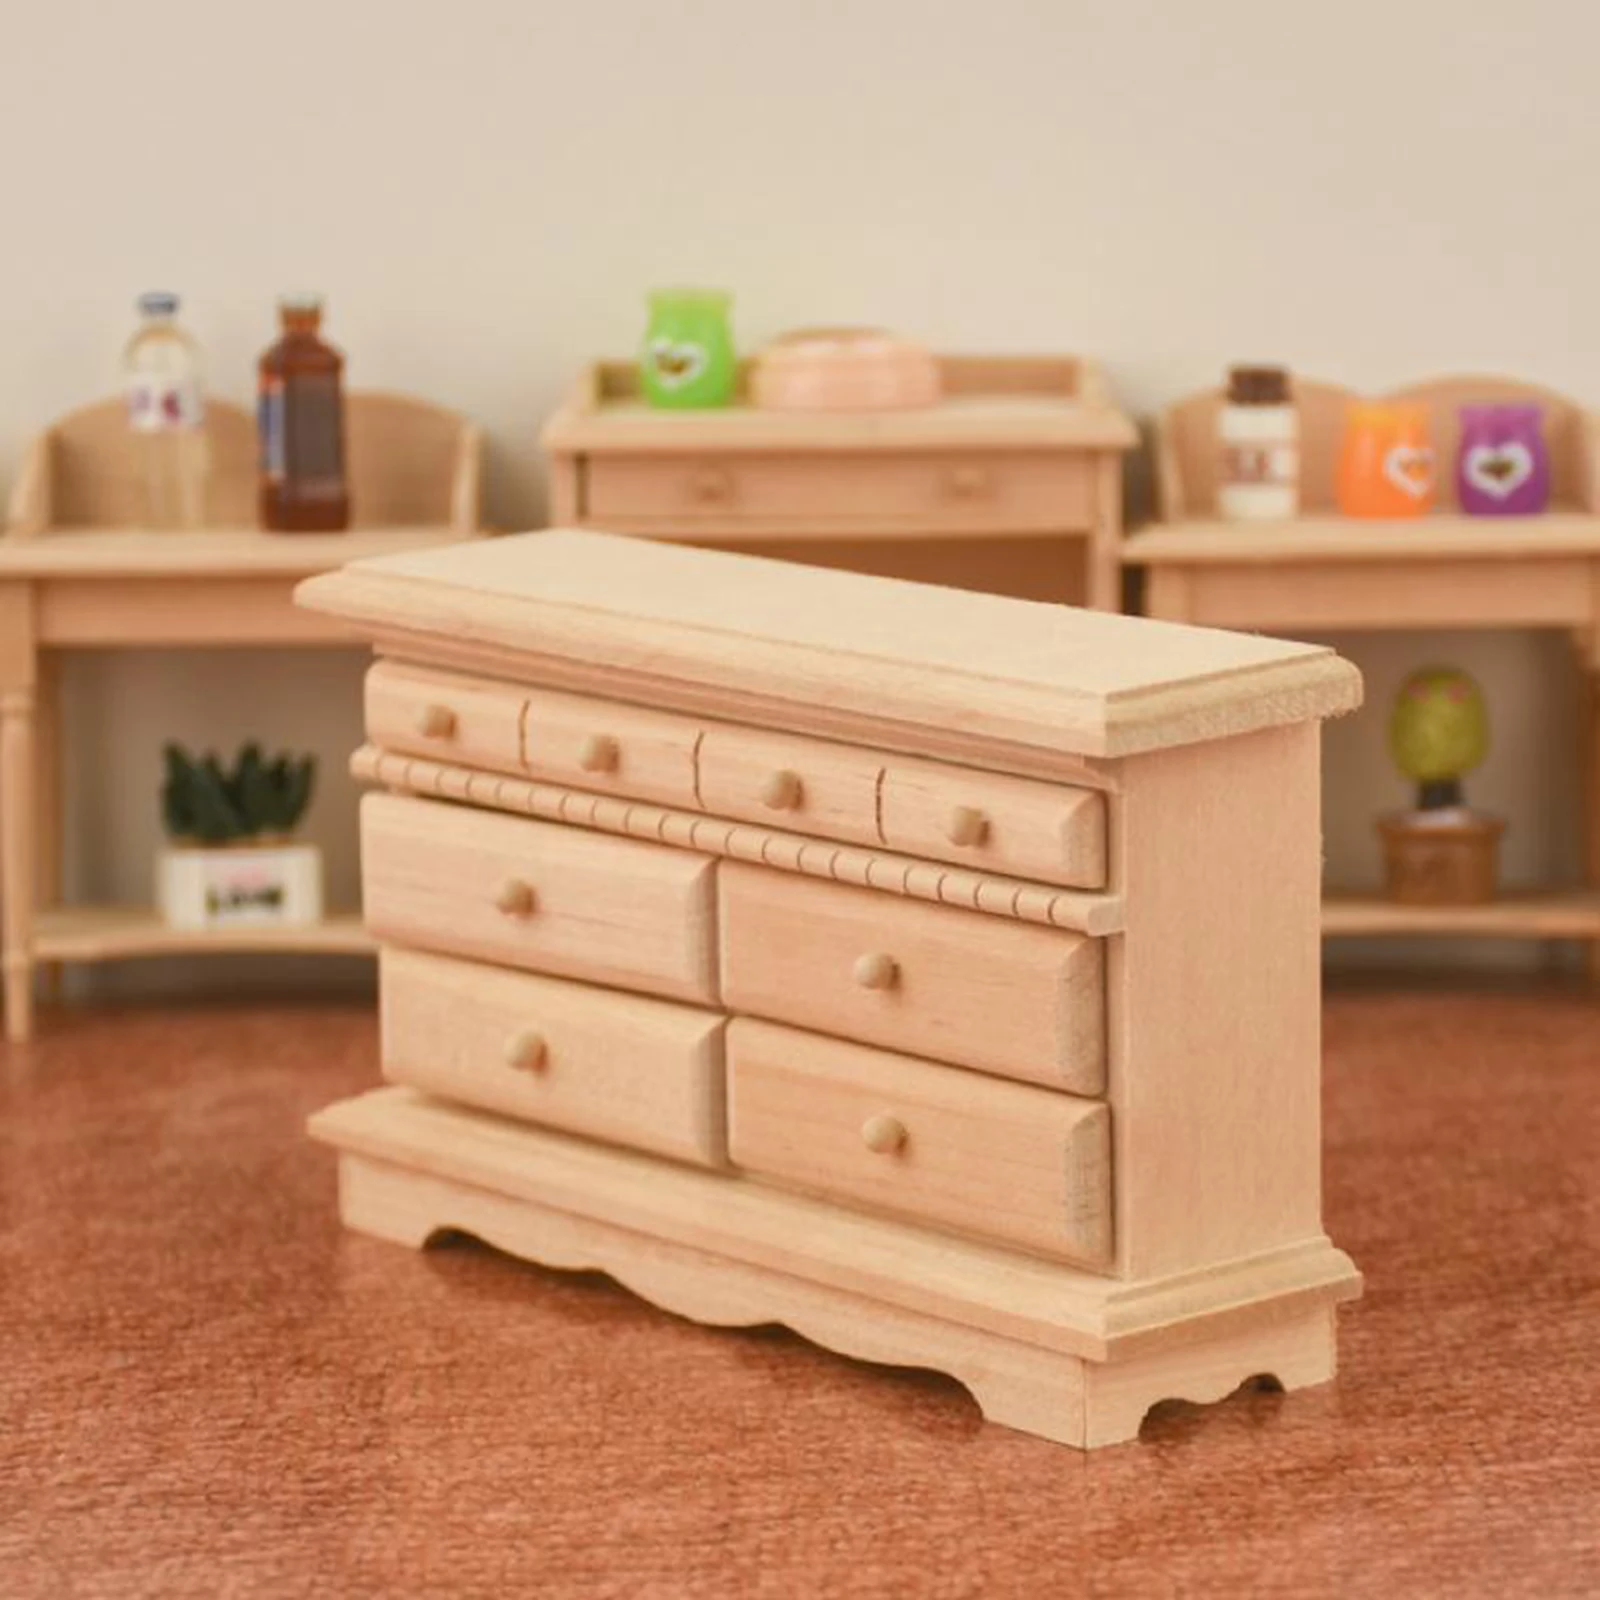 1/12 Doll House Mini Wood Cabinet Simulation Model Living Room Furniture Supplies Scenery Decor